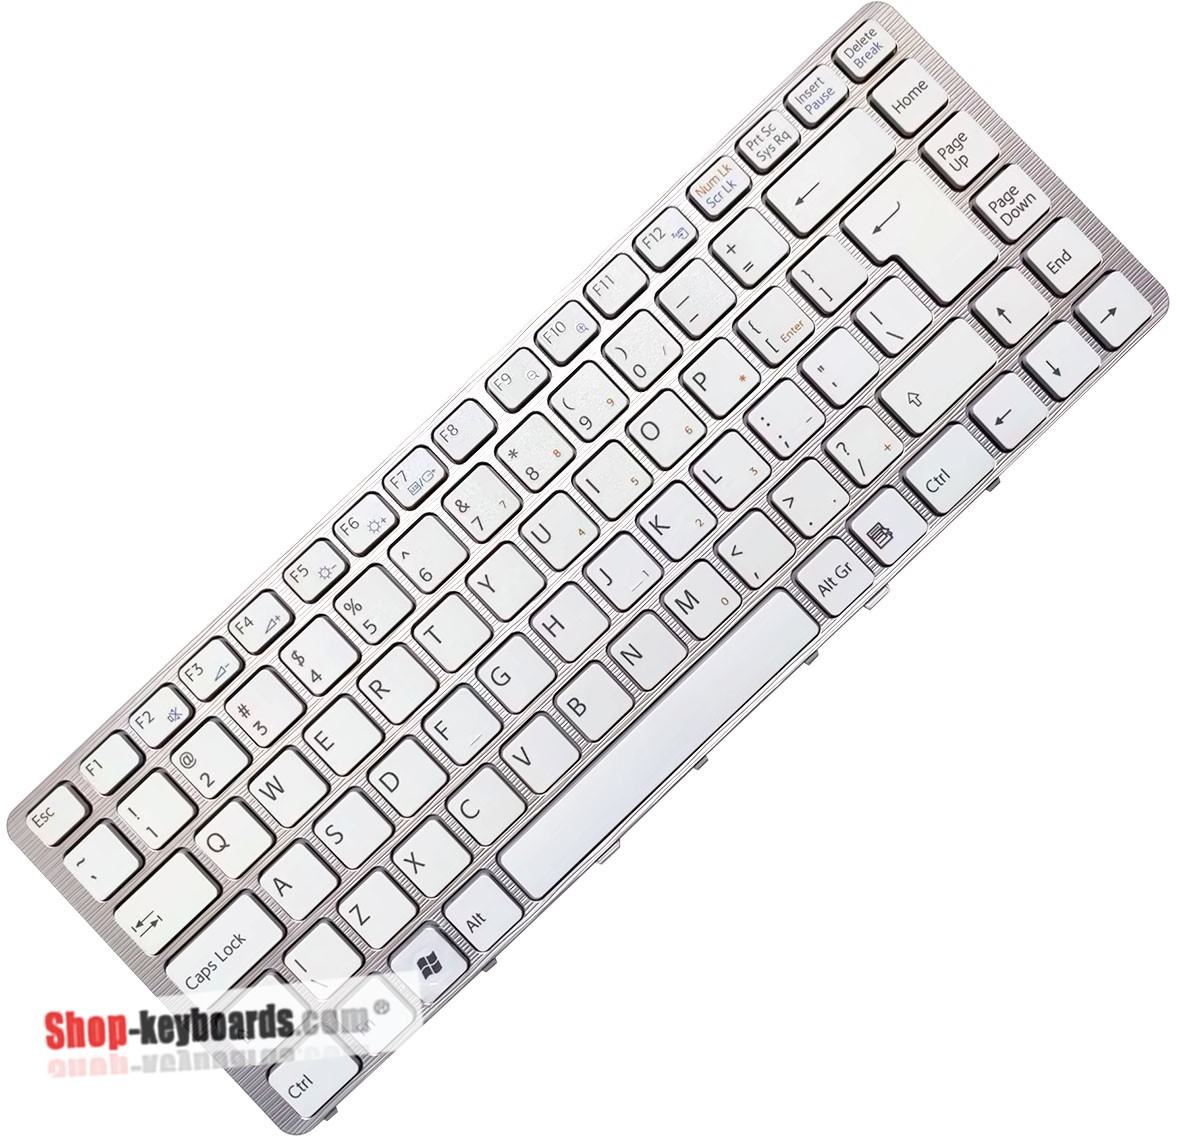 Sony VAIO VGN-NW242F  Keyboard replacement